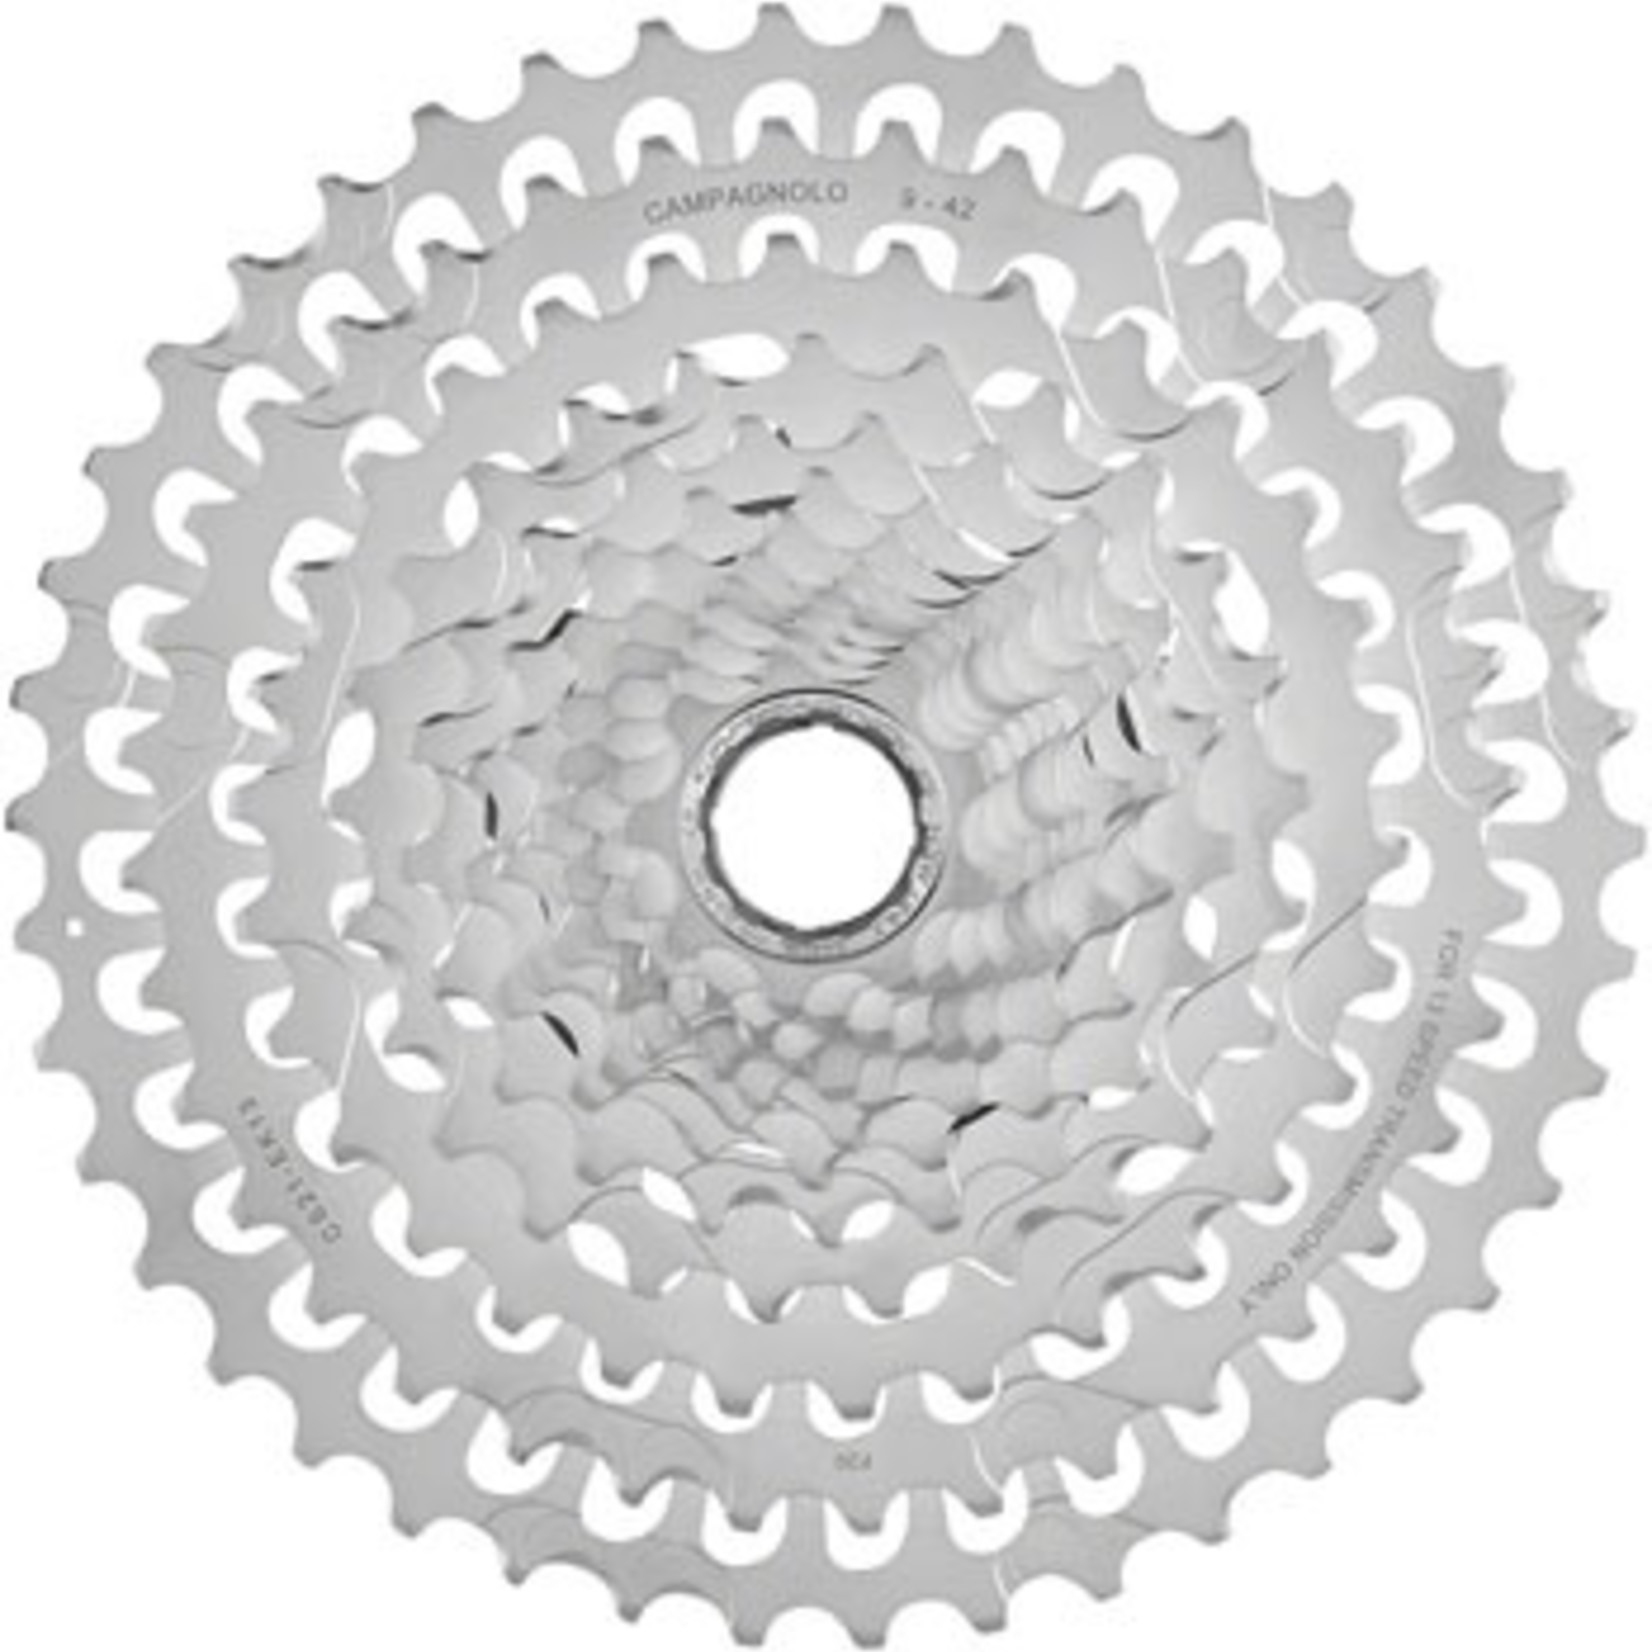 Campagnolo Campagnolo EKAR Cassette - 13-Speed, 9-42t, Silver, For N3W Driver Body